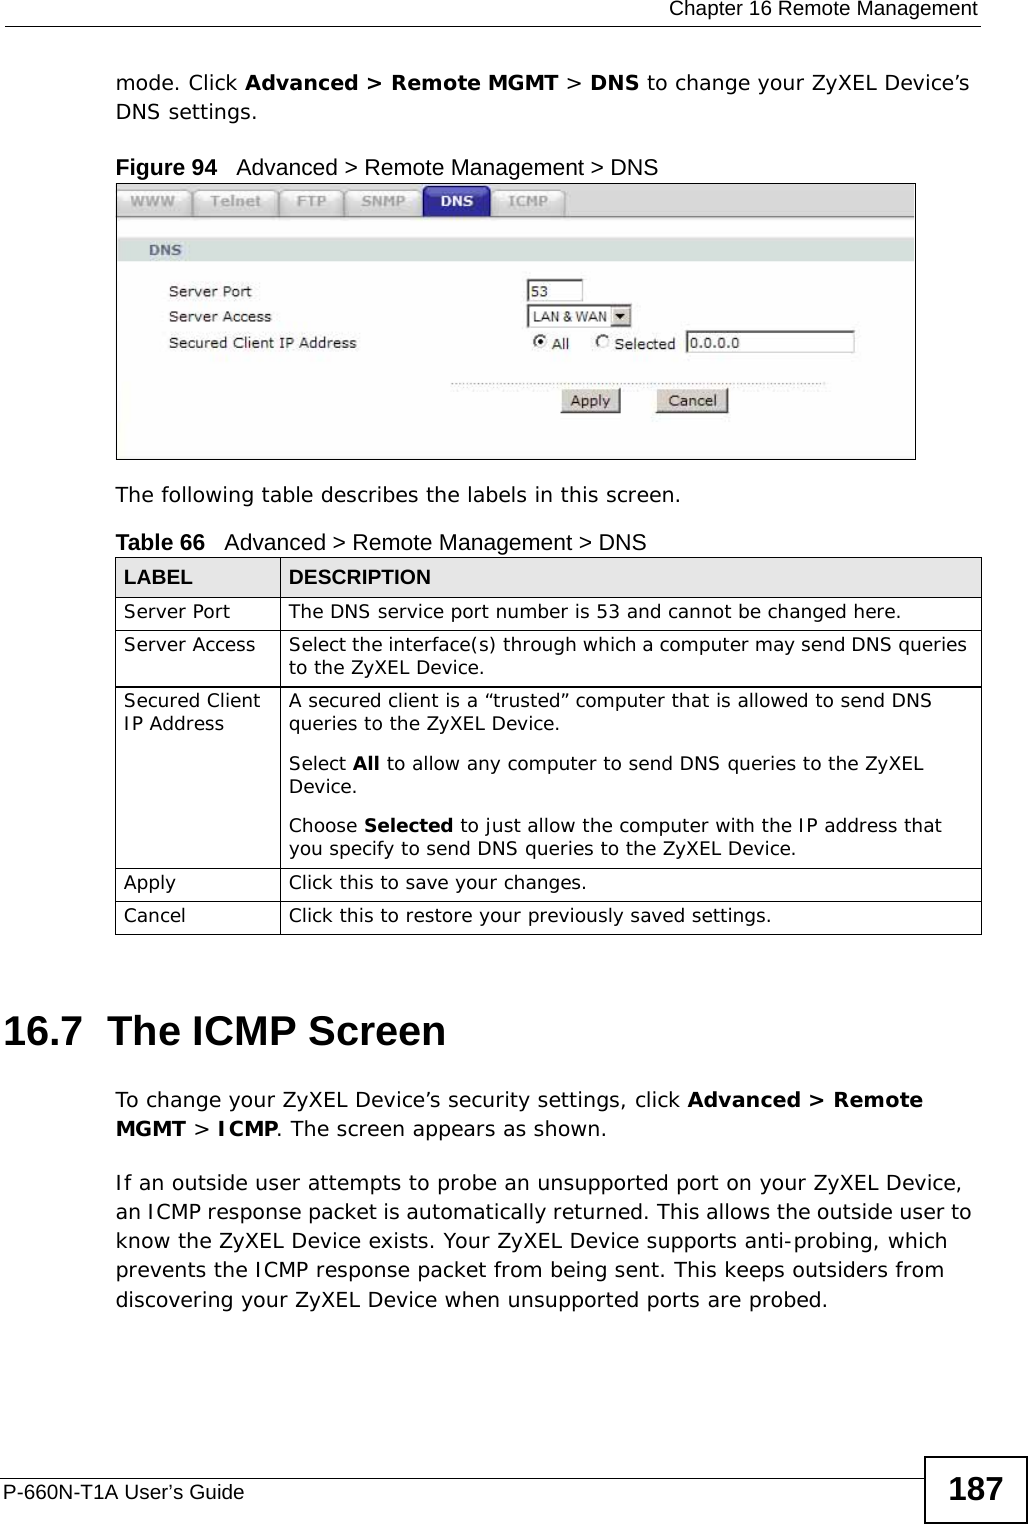  Chapter 16 Remote ManagementP-660N-T1A User’s Guide 187mode. Click Advanced &gt; Remote MGMT &gt; DNS to change your ZyXEL Device’s DNS settings.Figure 94   Advanced &gt; Remote Management &gt; DNSThe following table describes the labels in this screen.16.7  The ICMP ScreenTo change your ZyXEL Device’s security settings, click Advanced &gt; Remote MGMT &gt; ICMP. The screen appears as shown.If an outside user attempts to probe an unsupported port on your ZyXEL Device, an ICMP response packet is automatically returned. This allows the outside user to know the ZyXEL Device exists. Your ZyXEL Device supports anti-probing, which prevents the ICMP response packet from being sent. This keeps outsiders from discovering your ZyXEL Device when unsupported ports are probed. Table 66   Advanced &gt; Remote Management &gt; DNSLABEL DESCRIPTIONServer Port The DNS service port number is 53 and cannot be changed here.Server Access  Select the interface(s) through which a computer may send DNS queries to the ZyXEL Device.Secured Client IP Address A secured client is a “trusted” computer that is allowed to send DNS queries to the ZyXEL Device.Select All to allow any computer to send DNS queries to the ZyXEL Device.Choose Selected to just allow the computer with the IP address that you specify to send DNS queries to the ZyXEL Device.Apply Click this to save your changes.Cancel Click this to restore your previously saved settings.